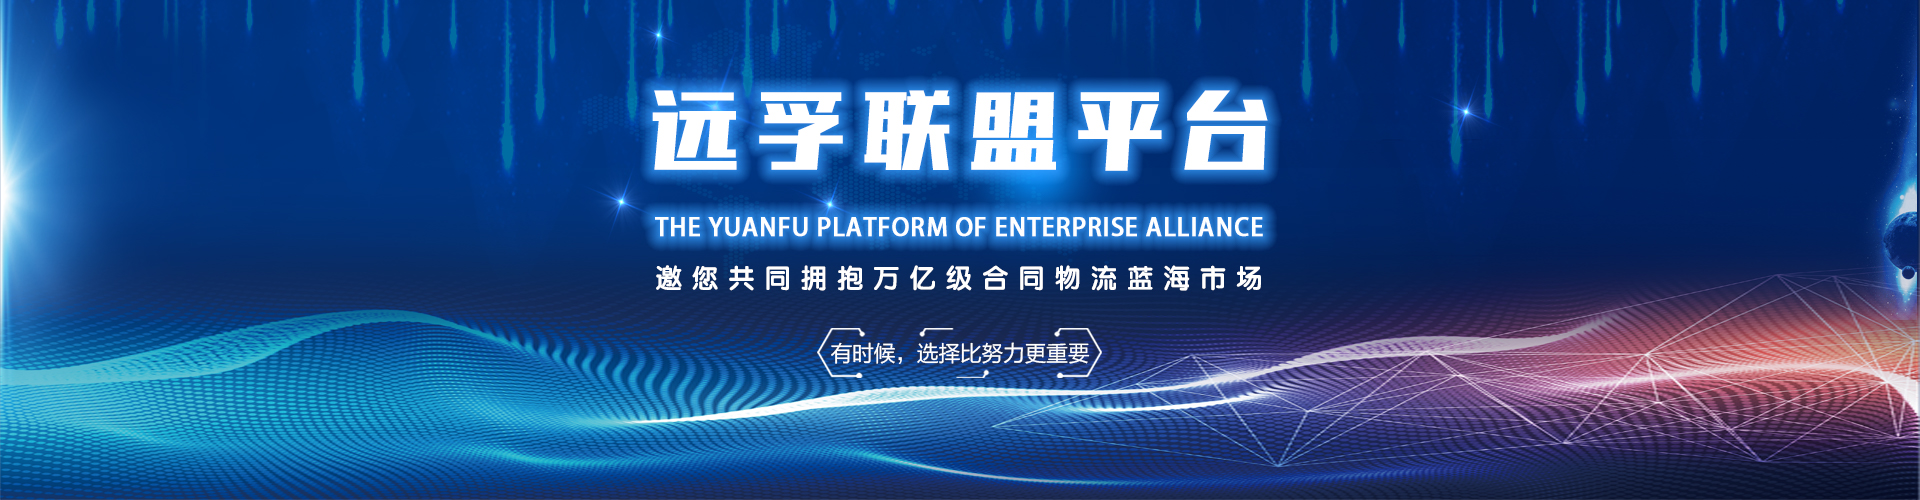 Transportation Service_Yuanfu Logistics Group Co.,Ltd.—Serving our customer to focus on core business,win-win on the supply chain【official website】